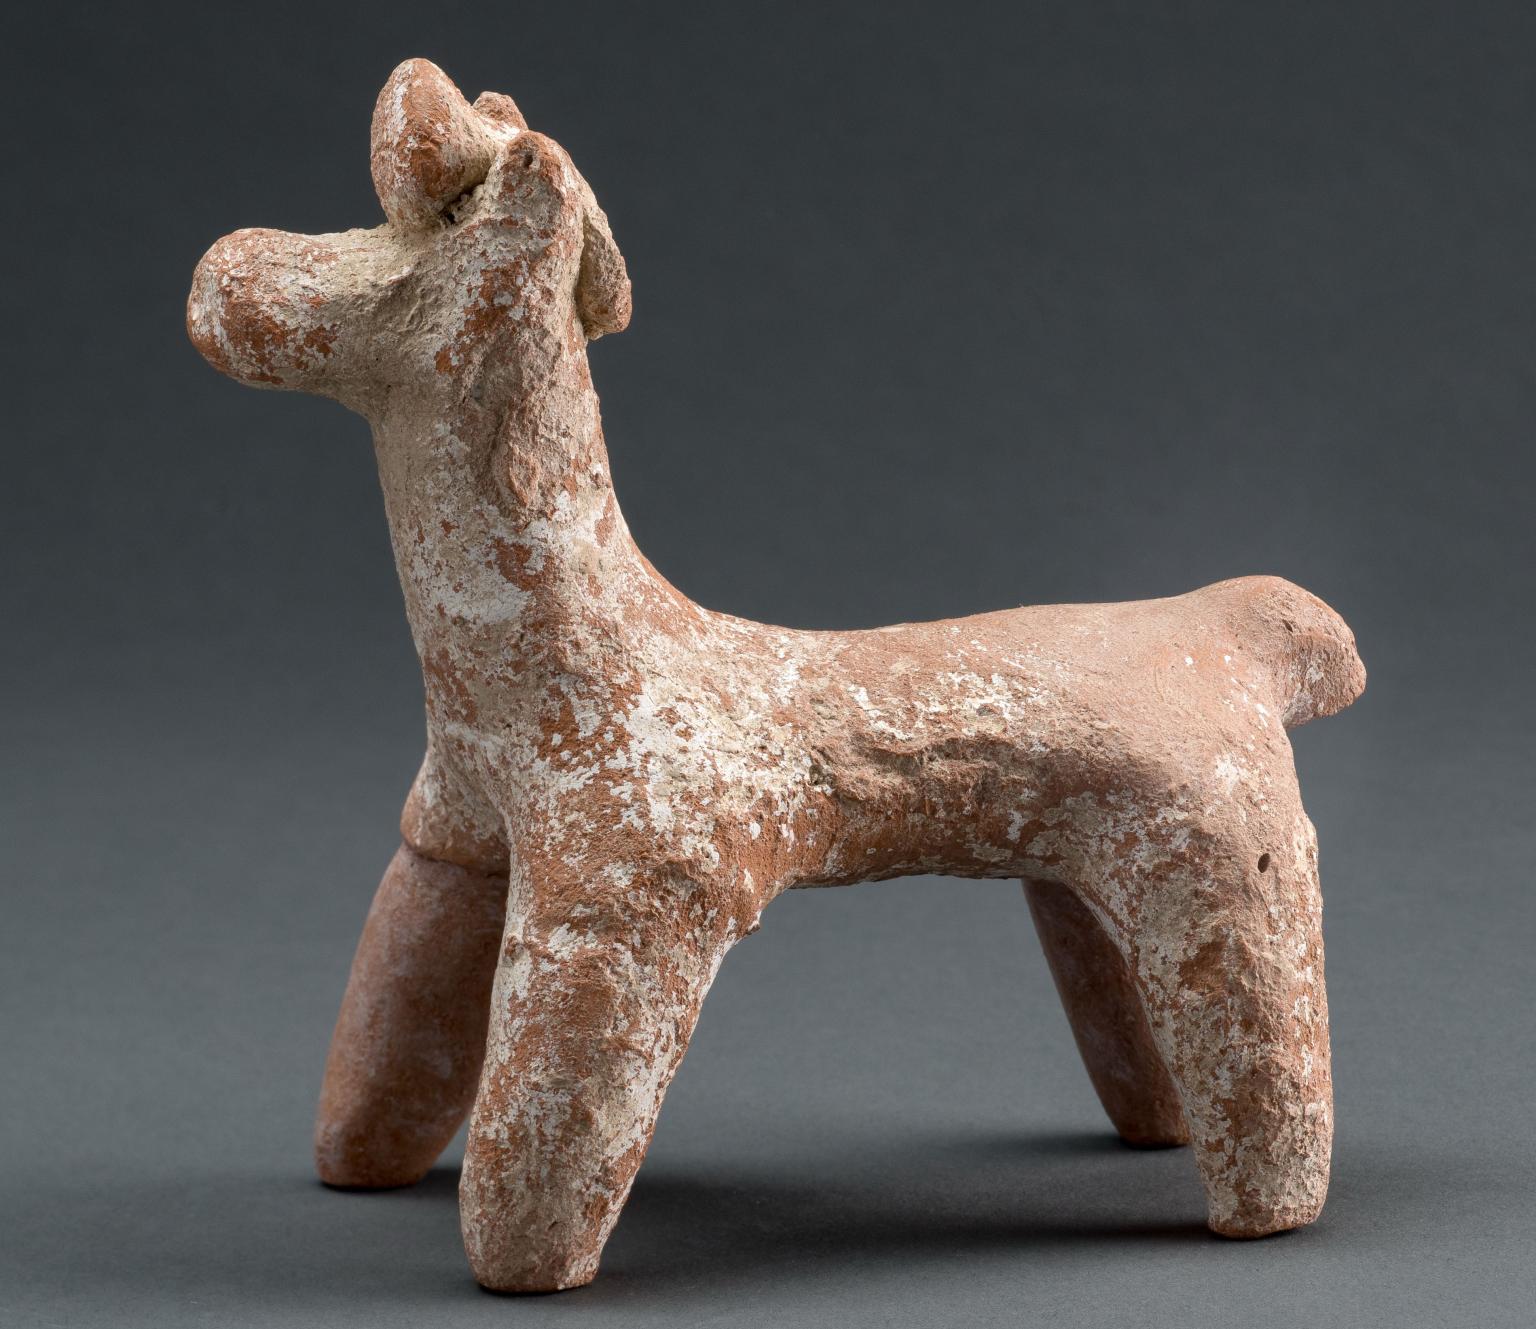 Terra-cotta figurine of horse with ornament on head.